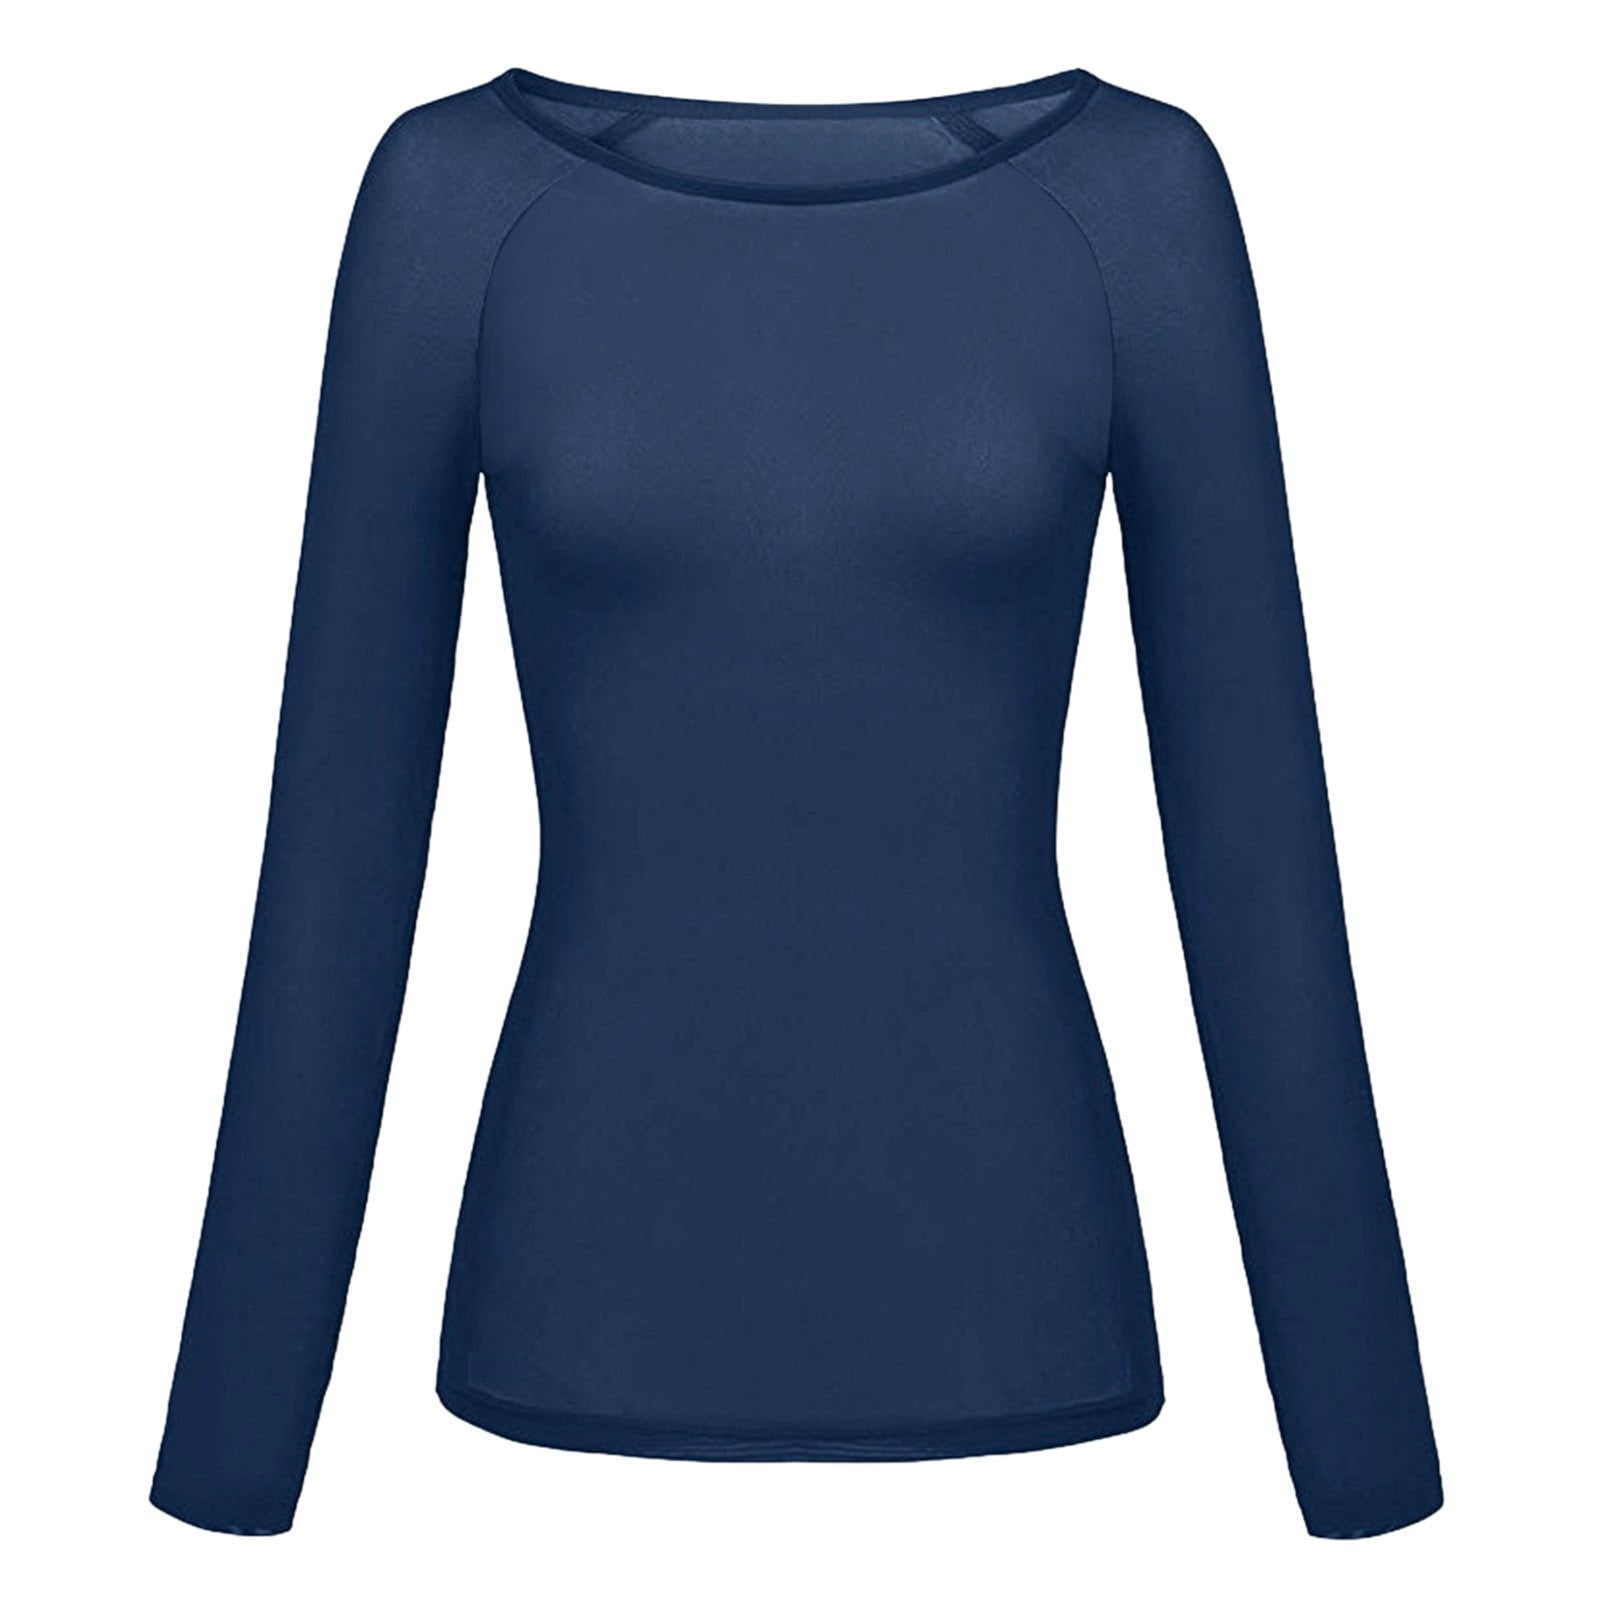 Tops for Women Casual Solid Color See Through Long Sleeve Seamless Arm ...